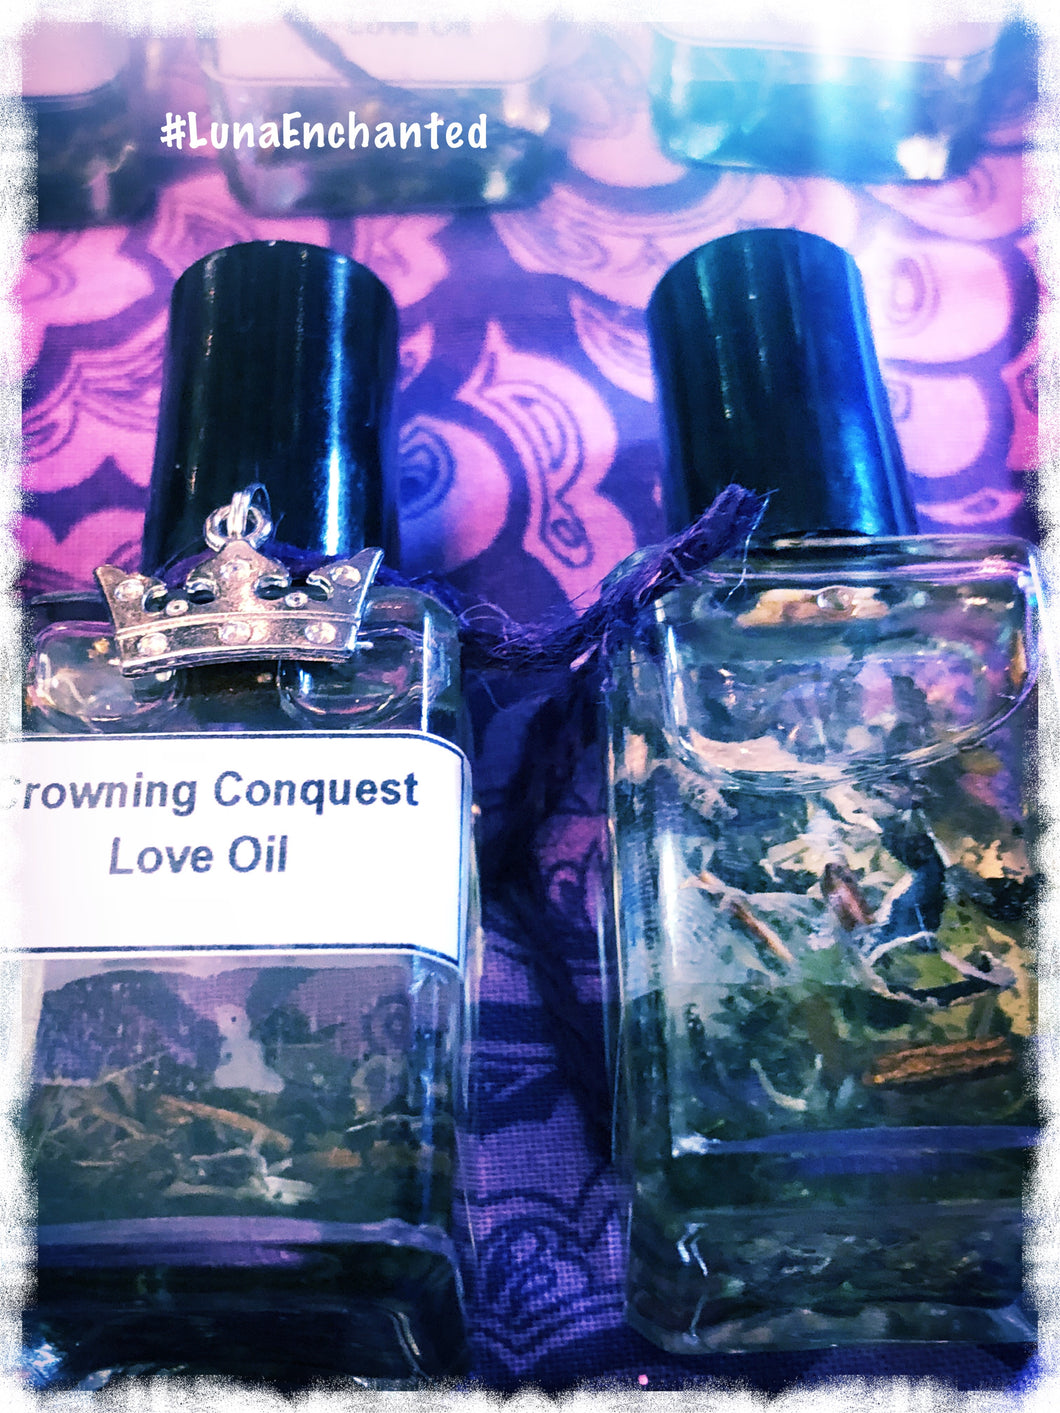 Crowning Conquest Love Oil